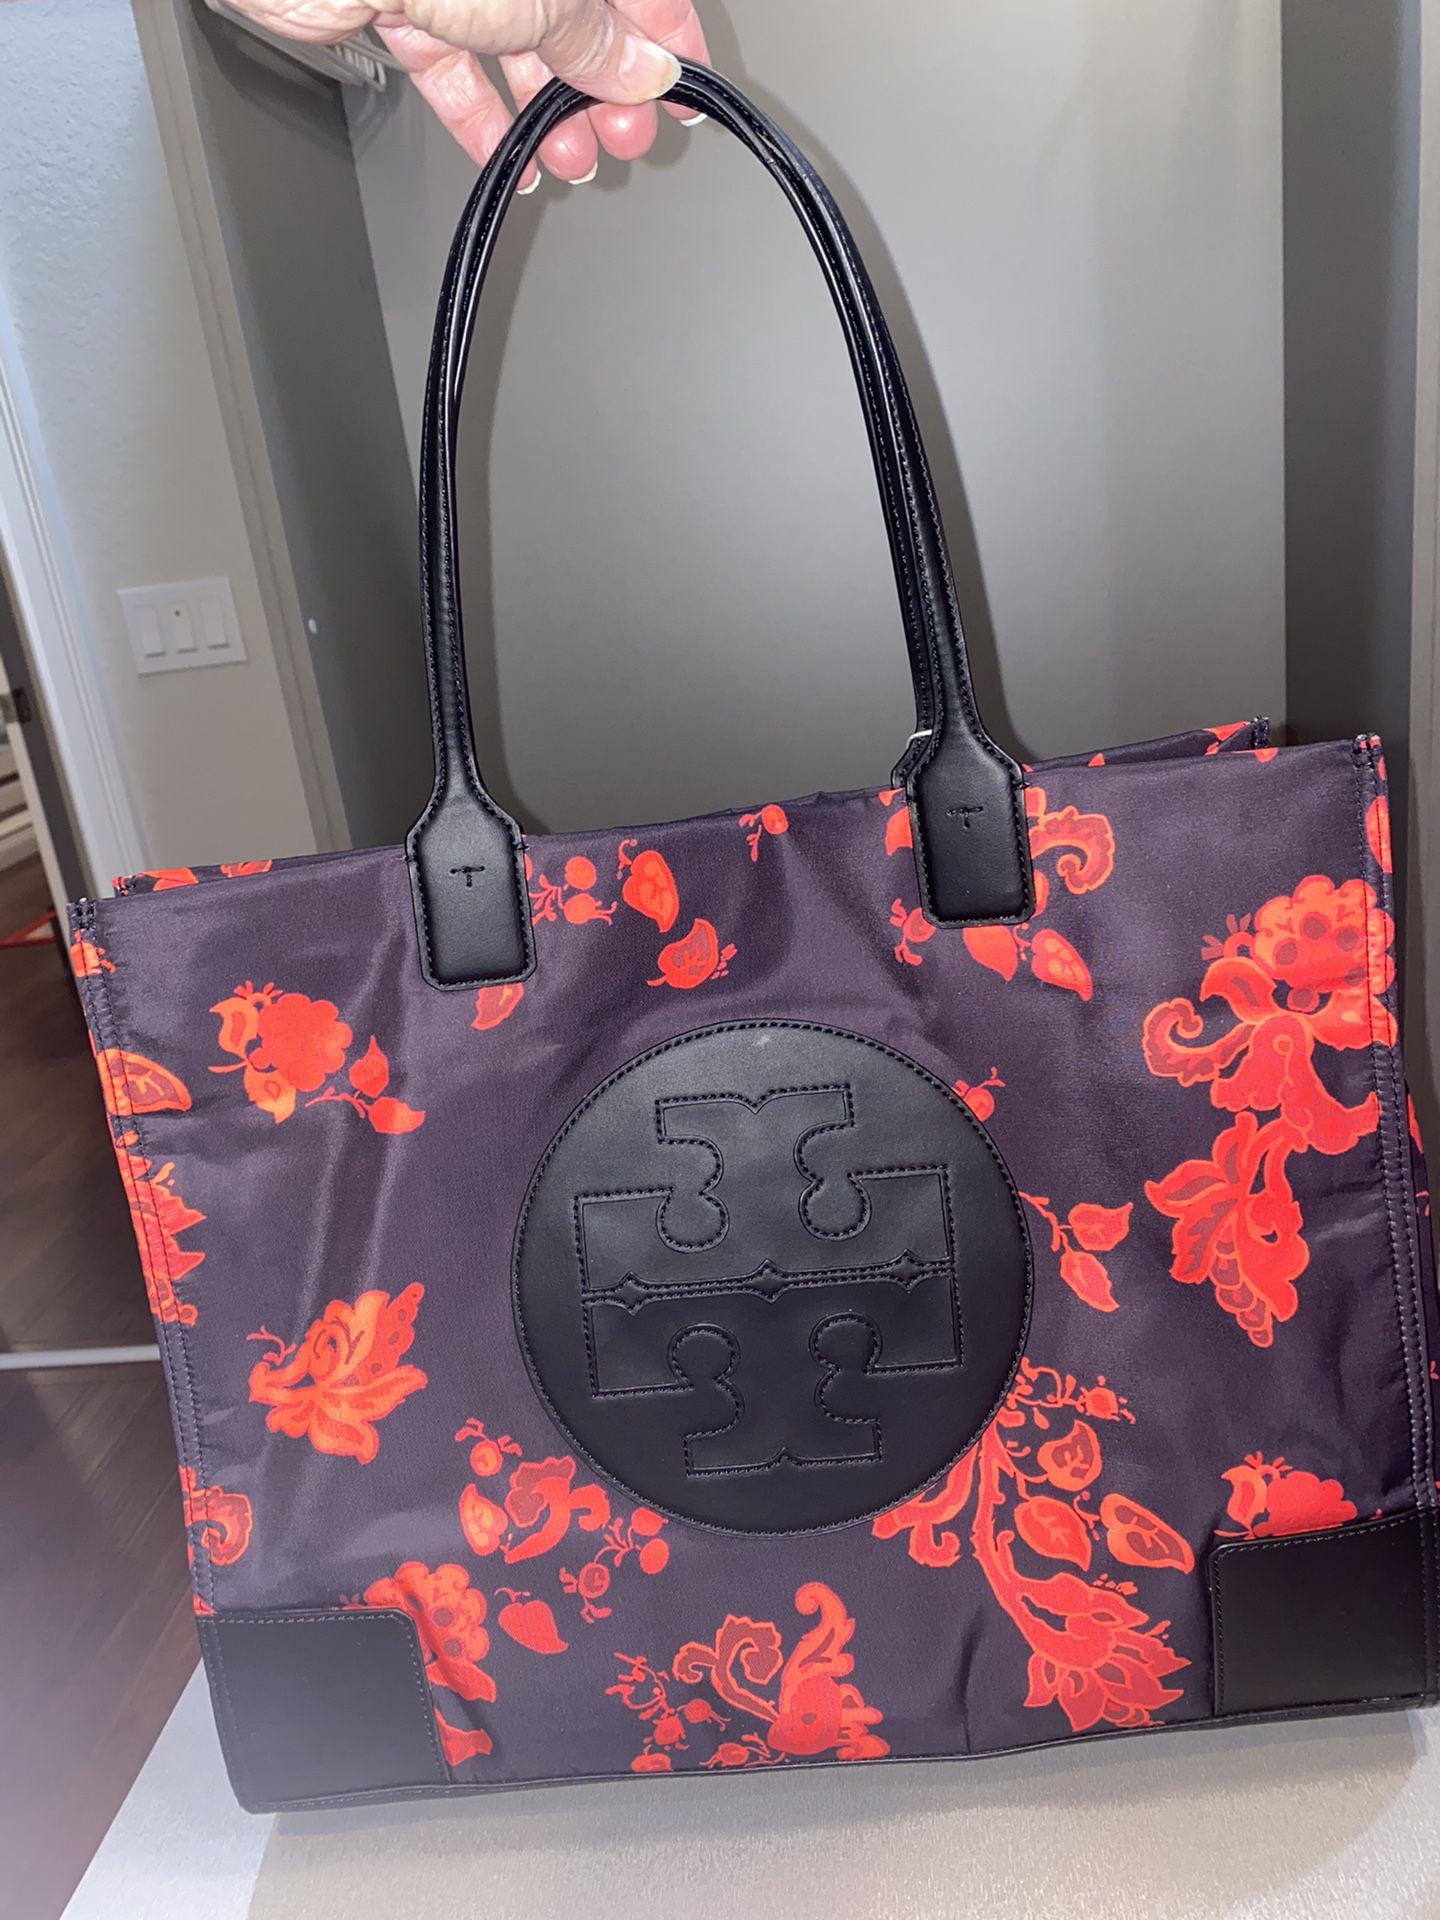 Tory Burch Tote Bag for Sale in West Palm Beach, FL - OfferUp